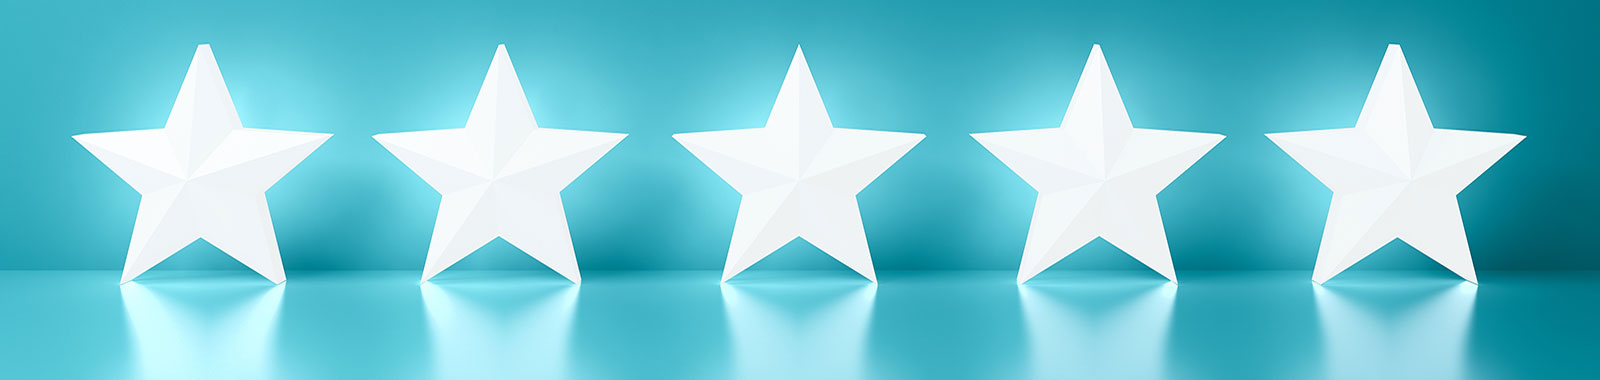 5 stars on a bright blue background